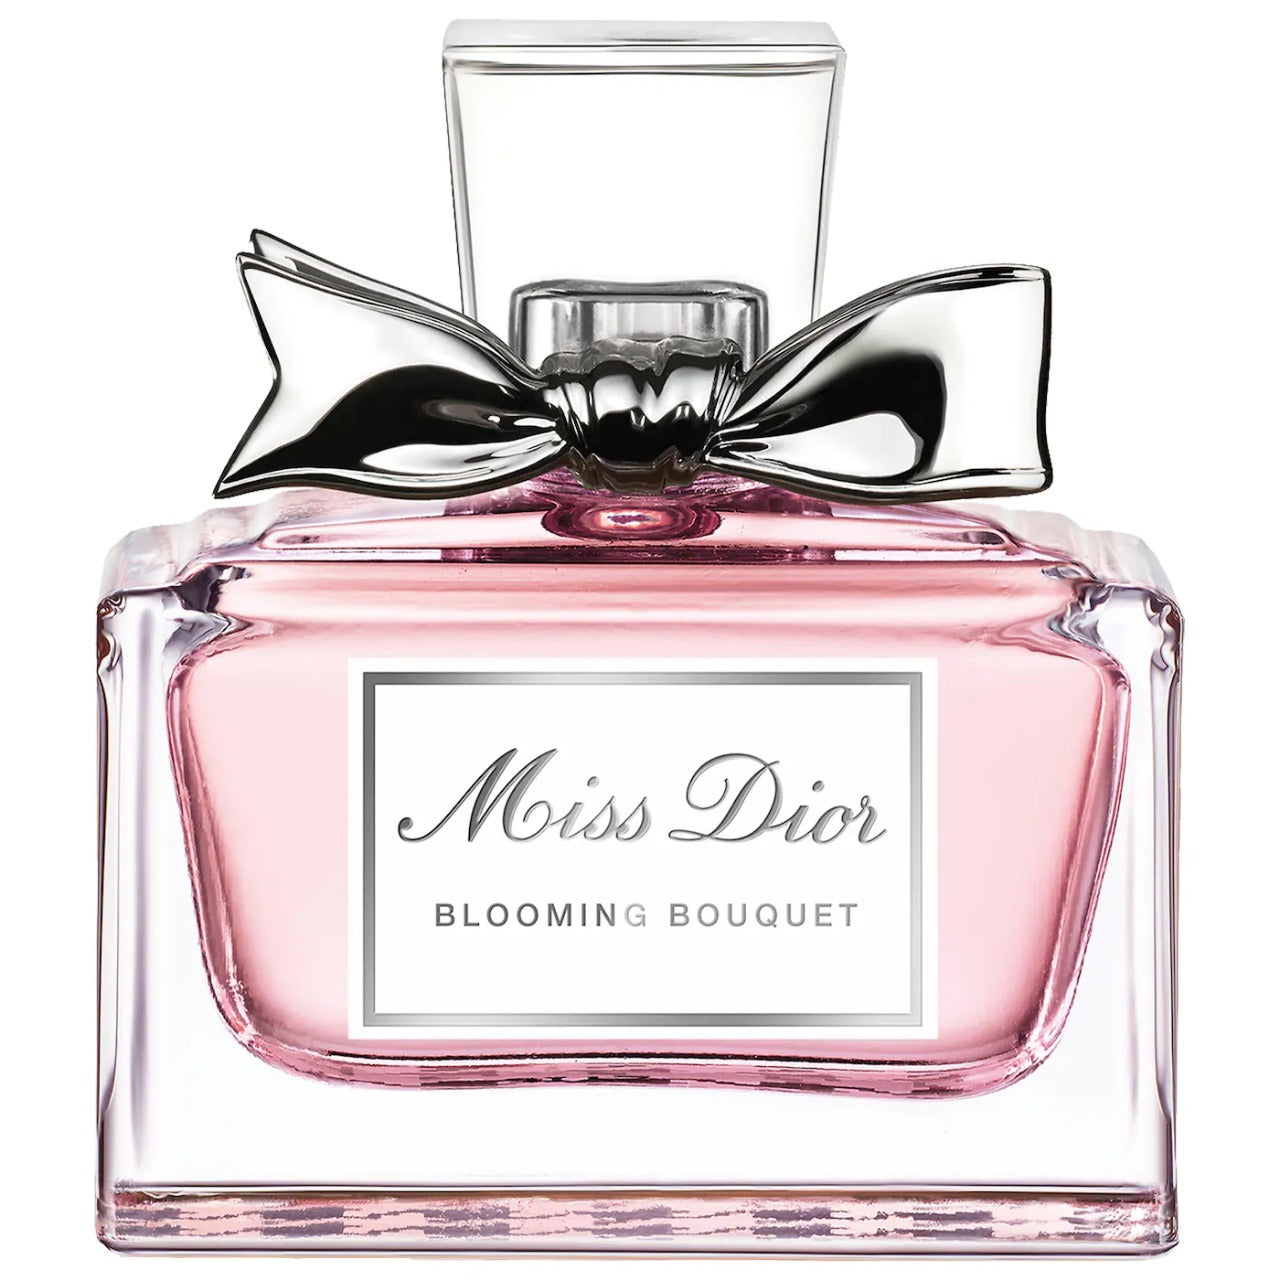 Dior Miss Dior Blooming Bouquet trial size- 5mL